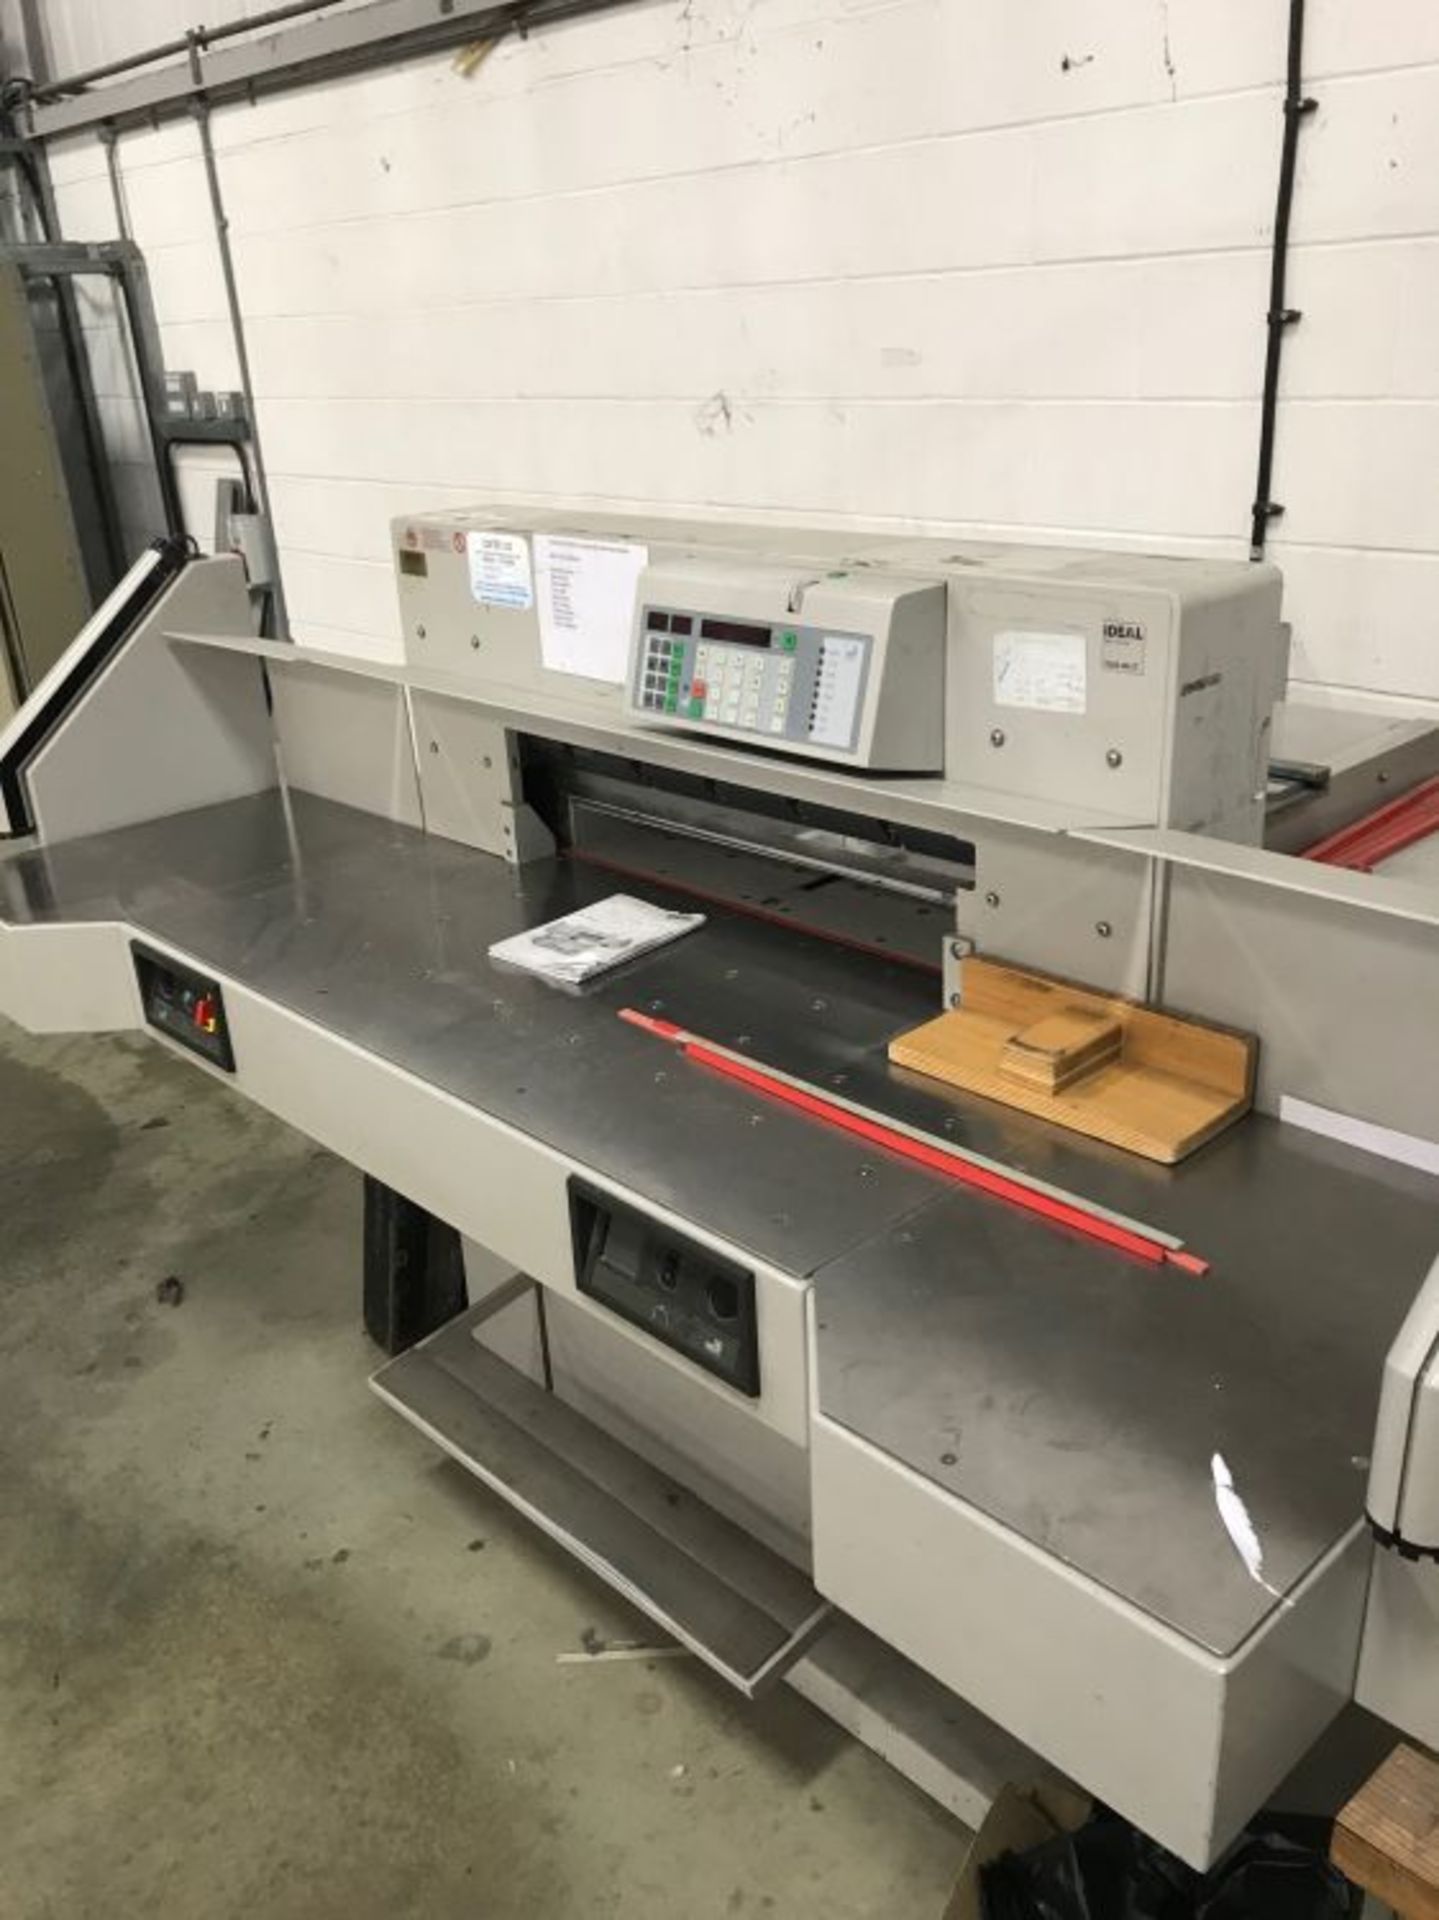 * IDEAL 7228-06 LT Guillotine. Full working order with Operators manual and spare Blade. This lot is